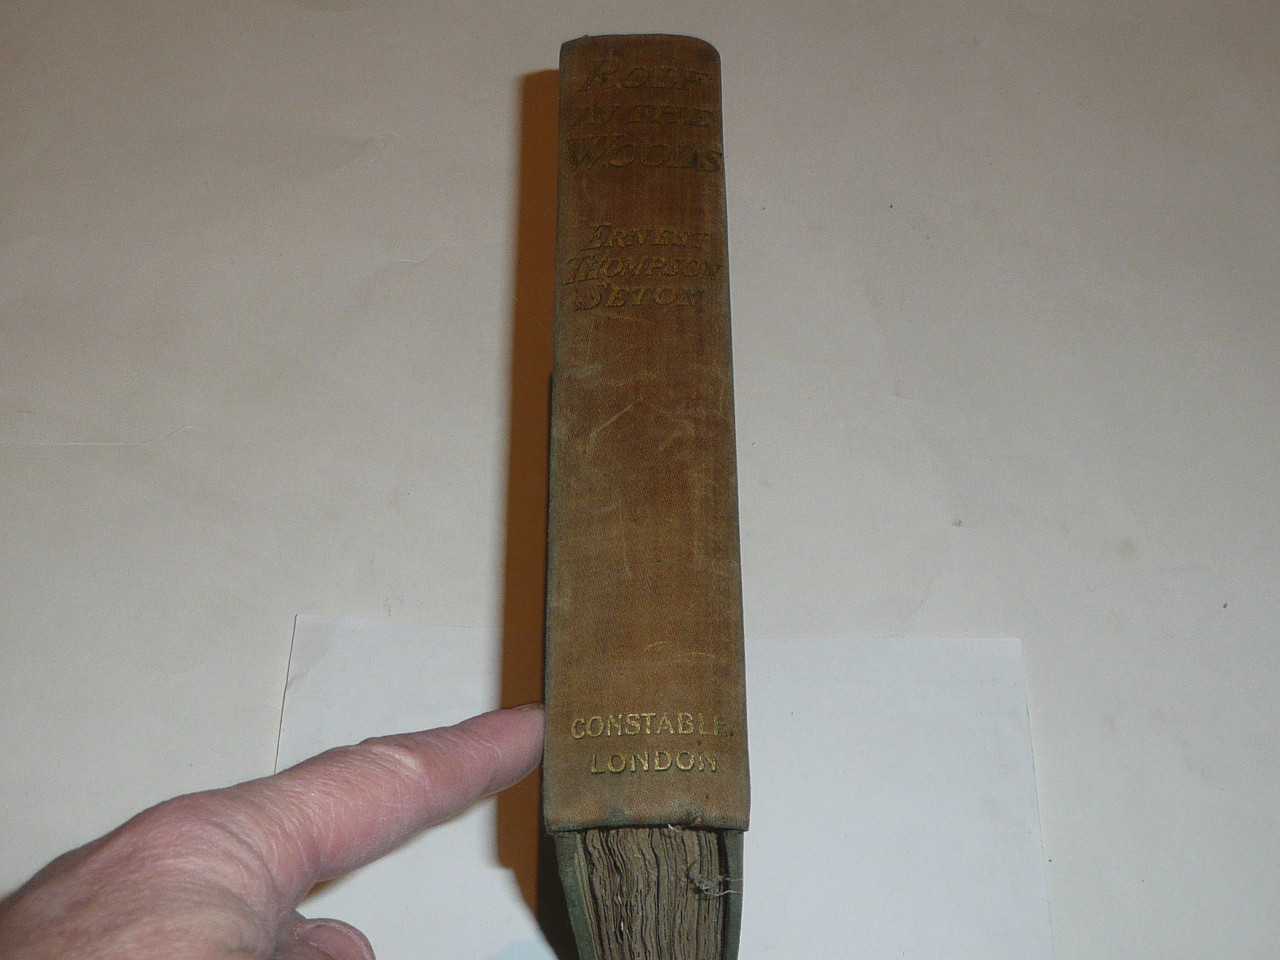 1911 Rolf in the Woods, By Ernest Thompson Seton, first printing, dedicated to the Boy Scouts of America.